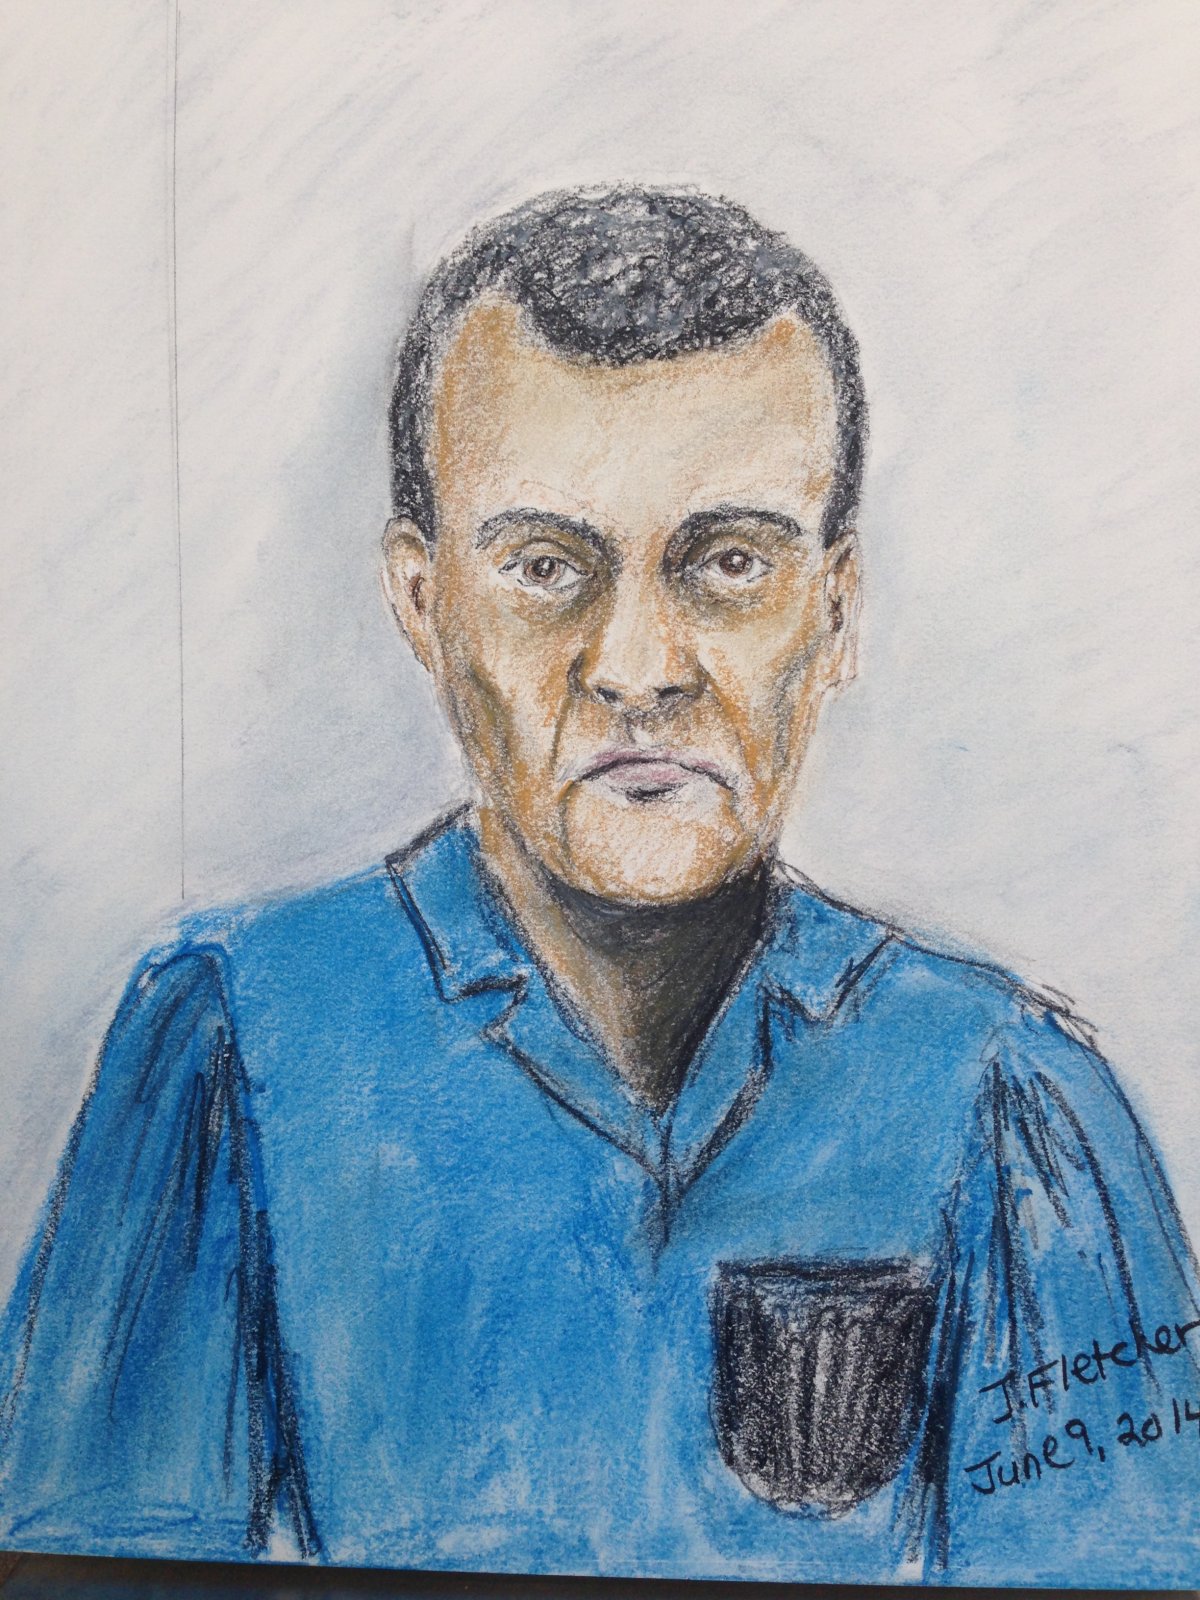 Hari Pal faces two charges of second-degree murder and one count of aggravated assault in connection to the murders of two women in Penbrooke Meadows on May 4th, 2014.